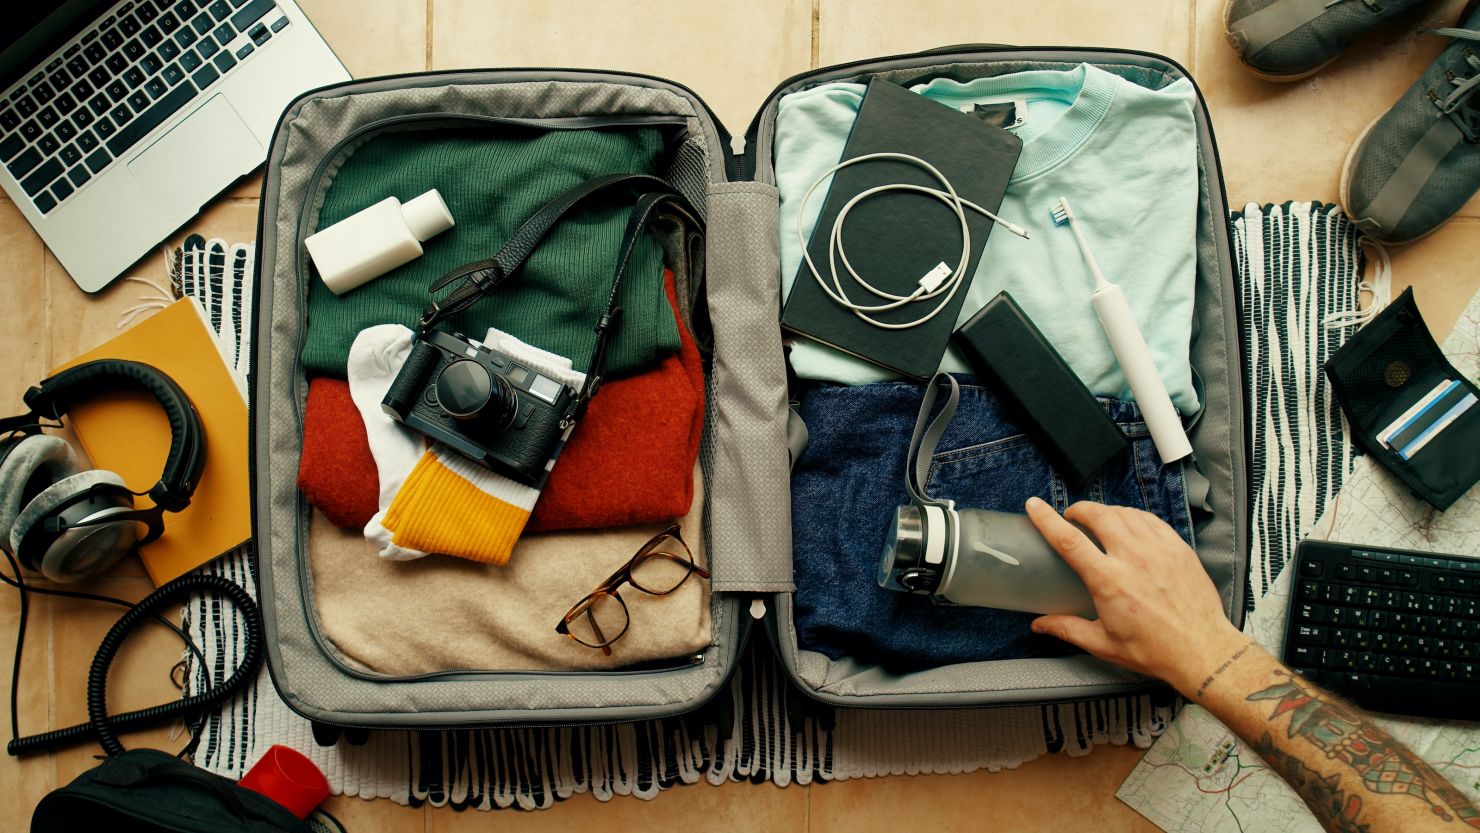 Traveller reveals how she fits 10 days' worth of clothes into a